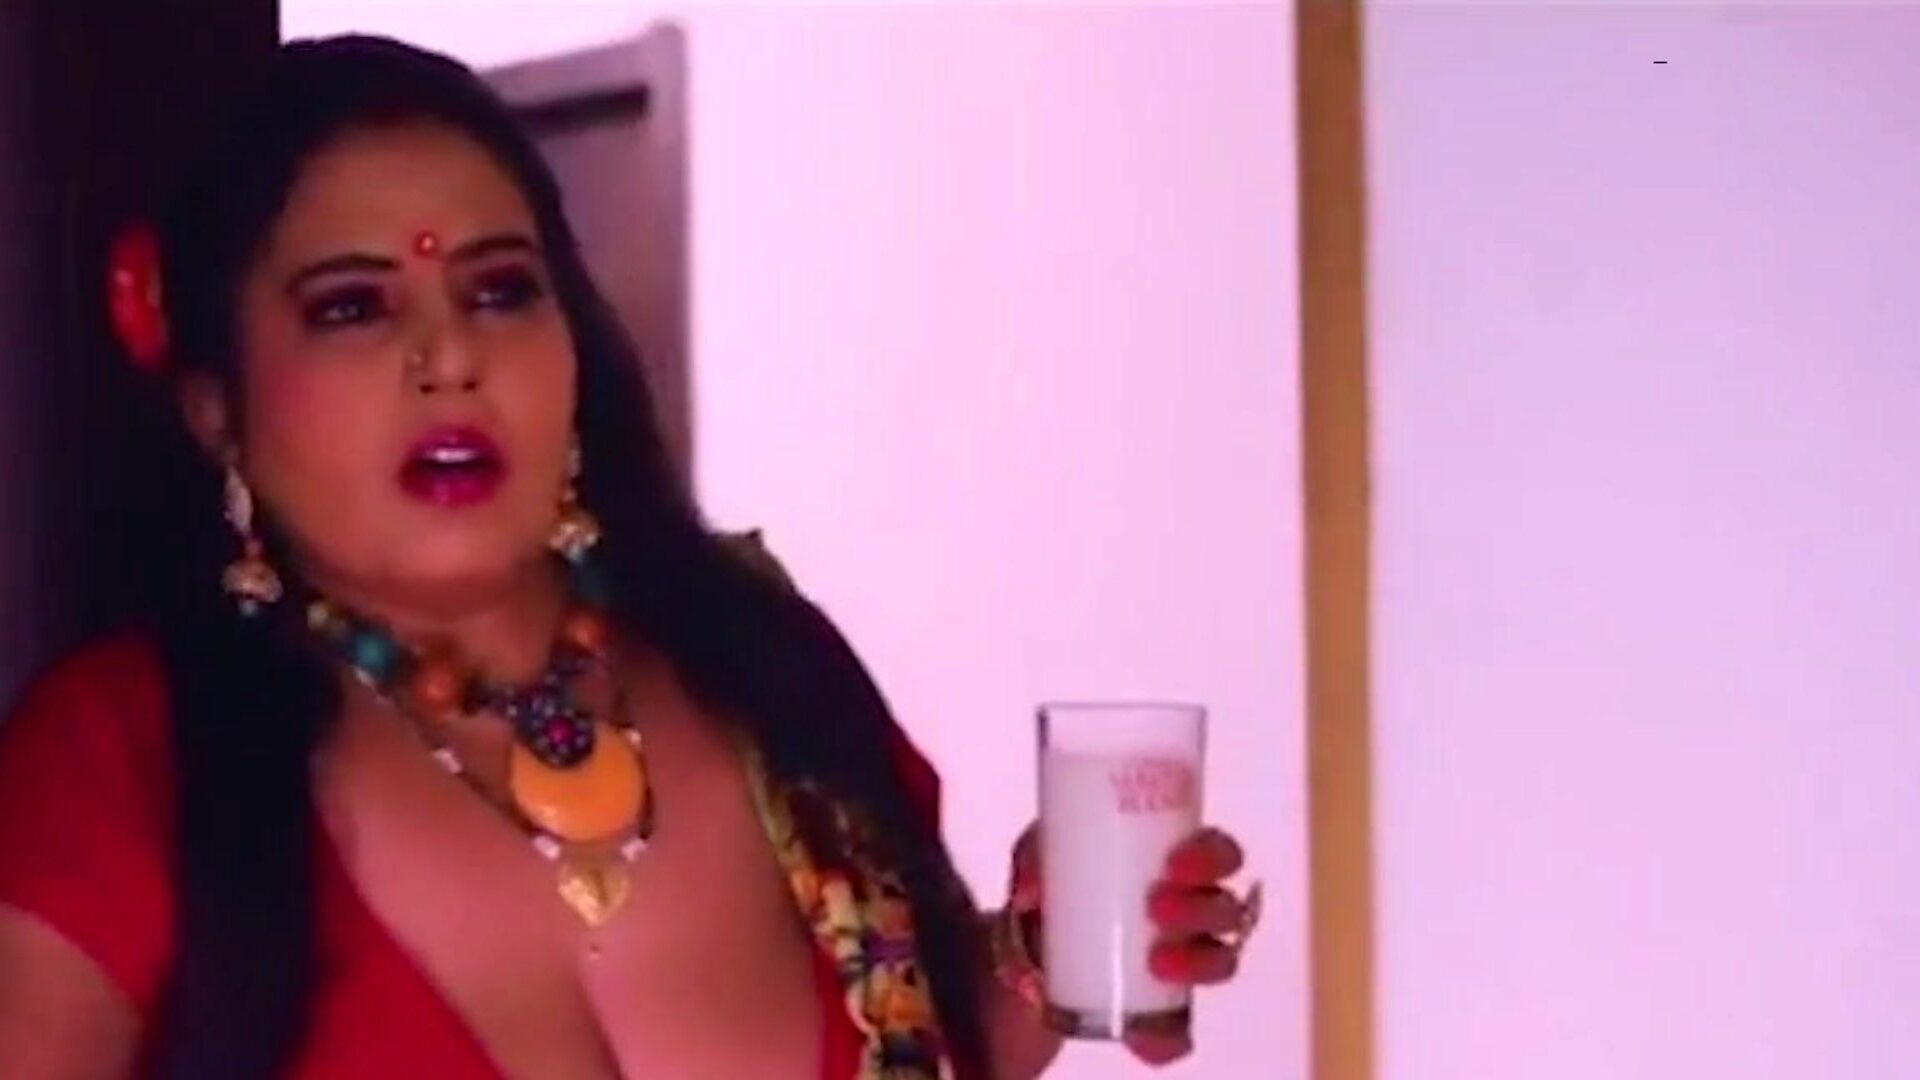 Kamvali Ko Papa Ne Choda, Free Indian HD Porn 53: xHamster Watch Kamvali Ko Papa Ne Choda clip on xHamster, the finest HD fuck-a-thon tube web page with tons of free-for-all Asian Indian & Aunty porn movies